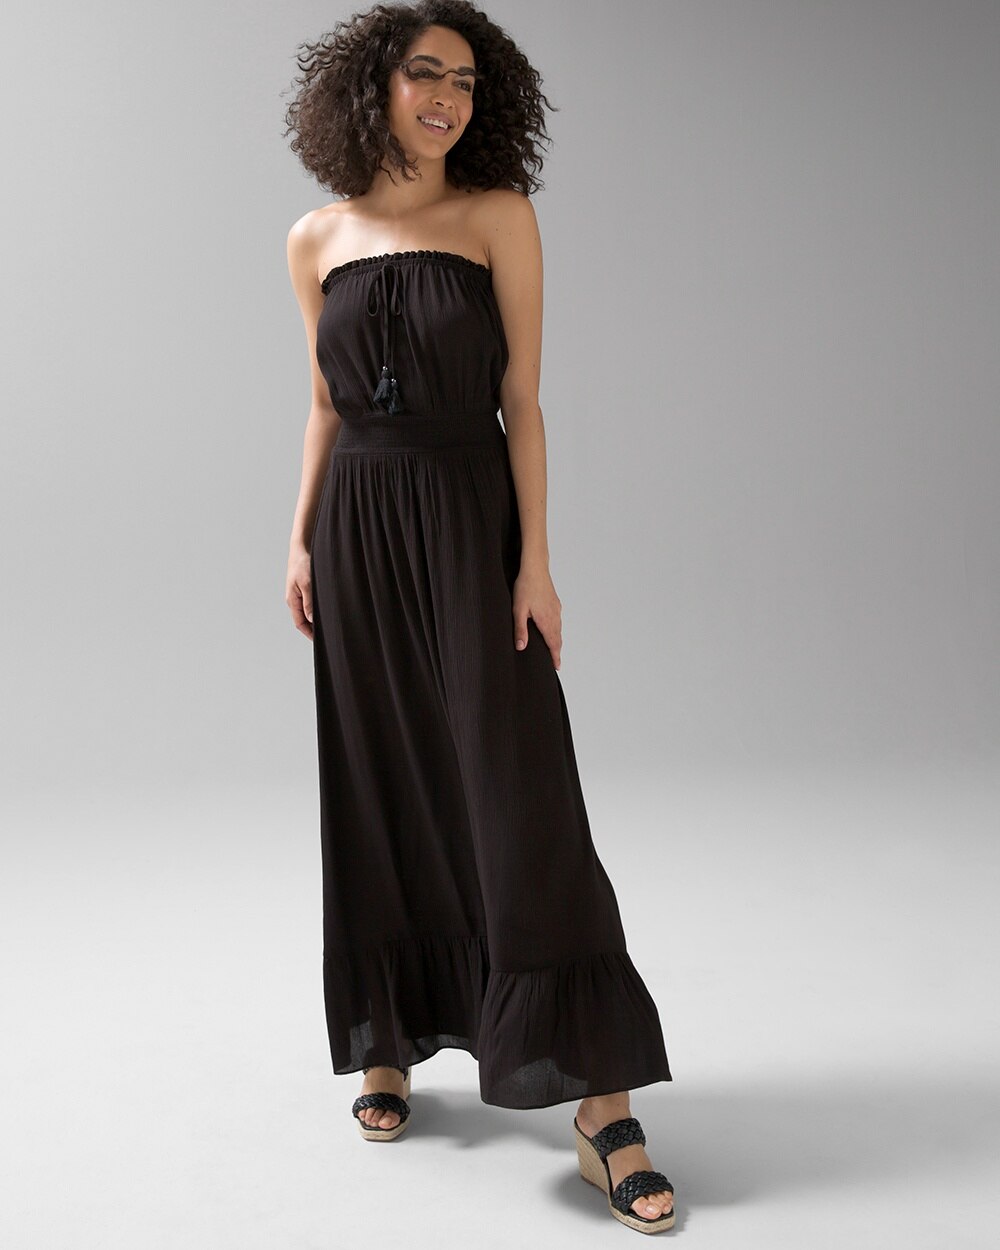 Strapless Maxi Coverup video preview image, click to start video